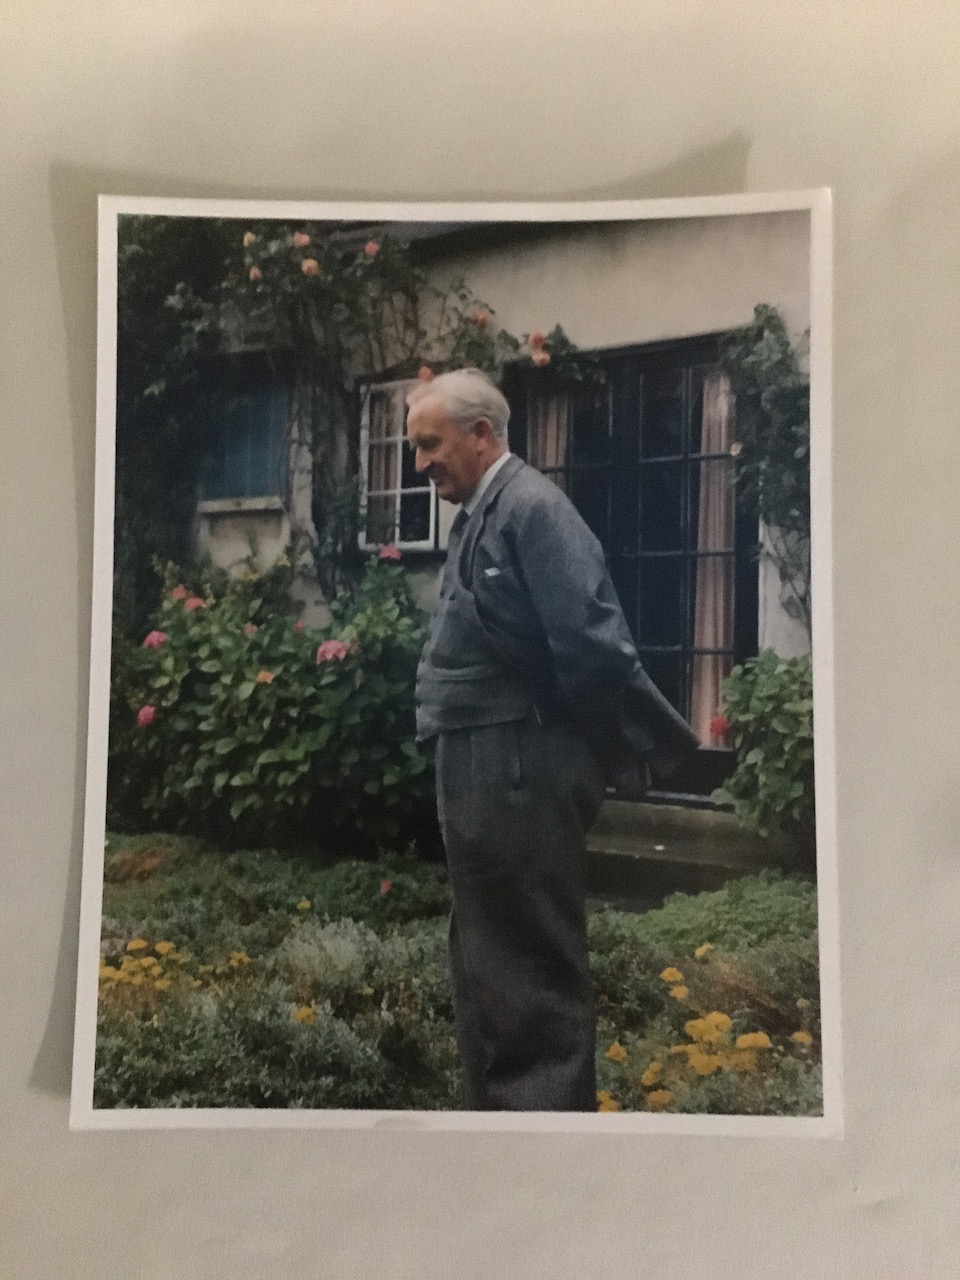 Exclusive Photographic Print: J.R.R. Tolkien enjoying the flowers in his garden